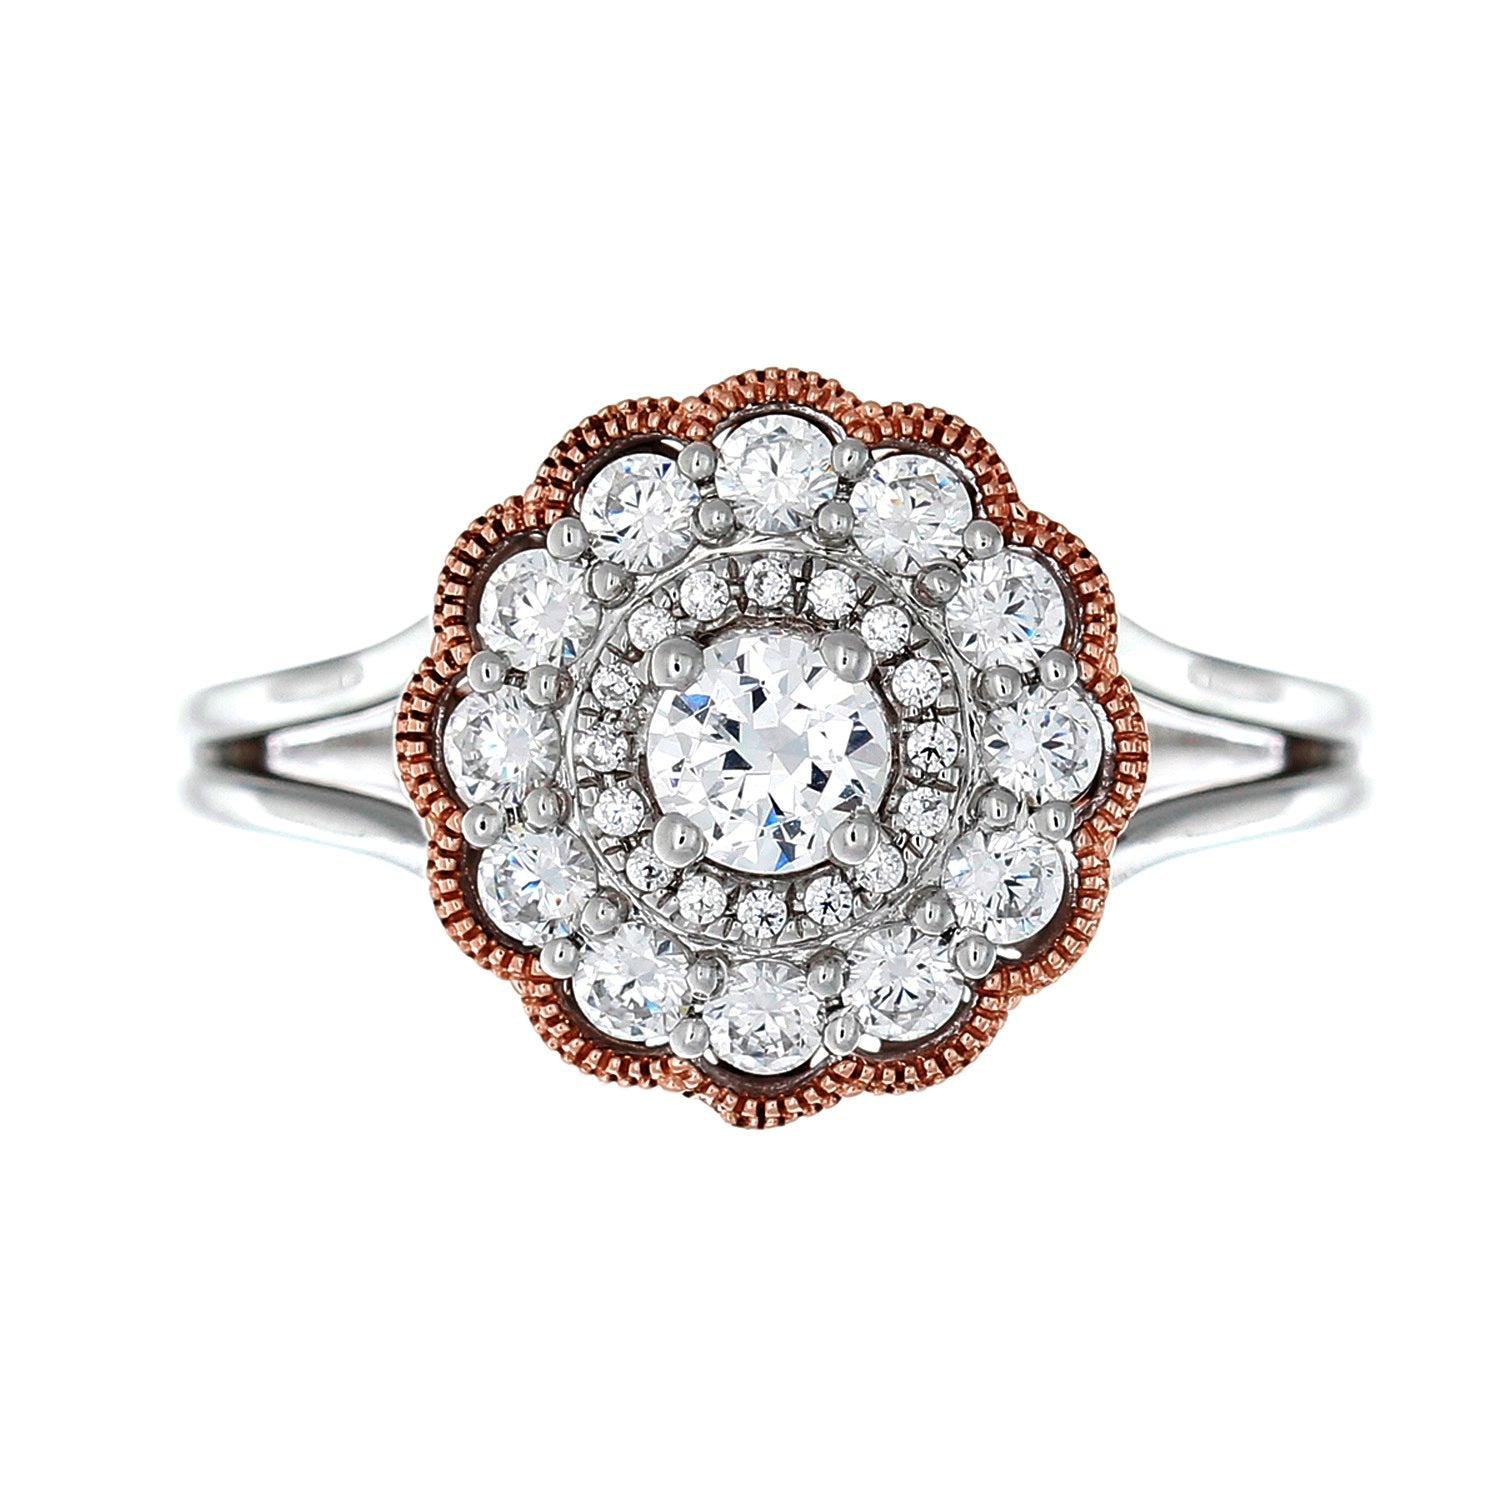 Rose Vintage Halo Diamond Engagement Ring made in 14k White and Rose gold-Round